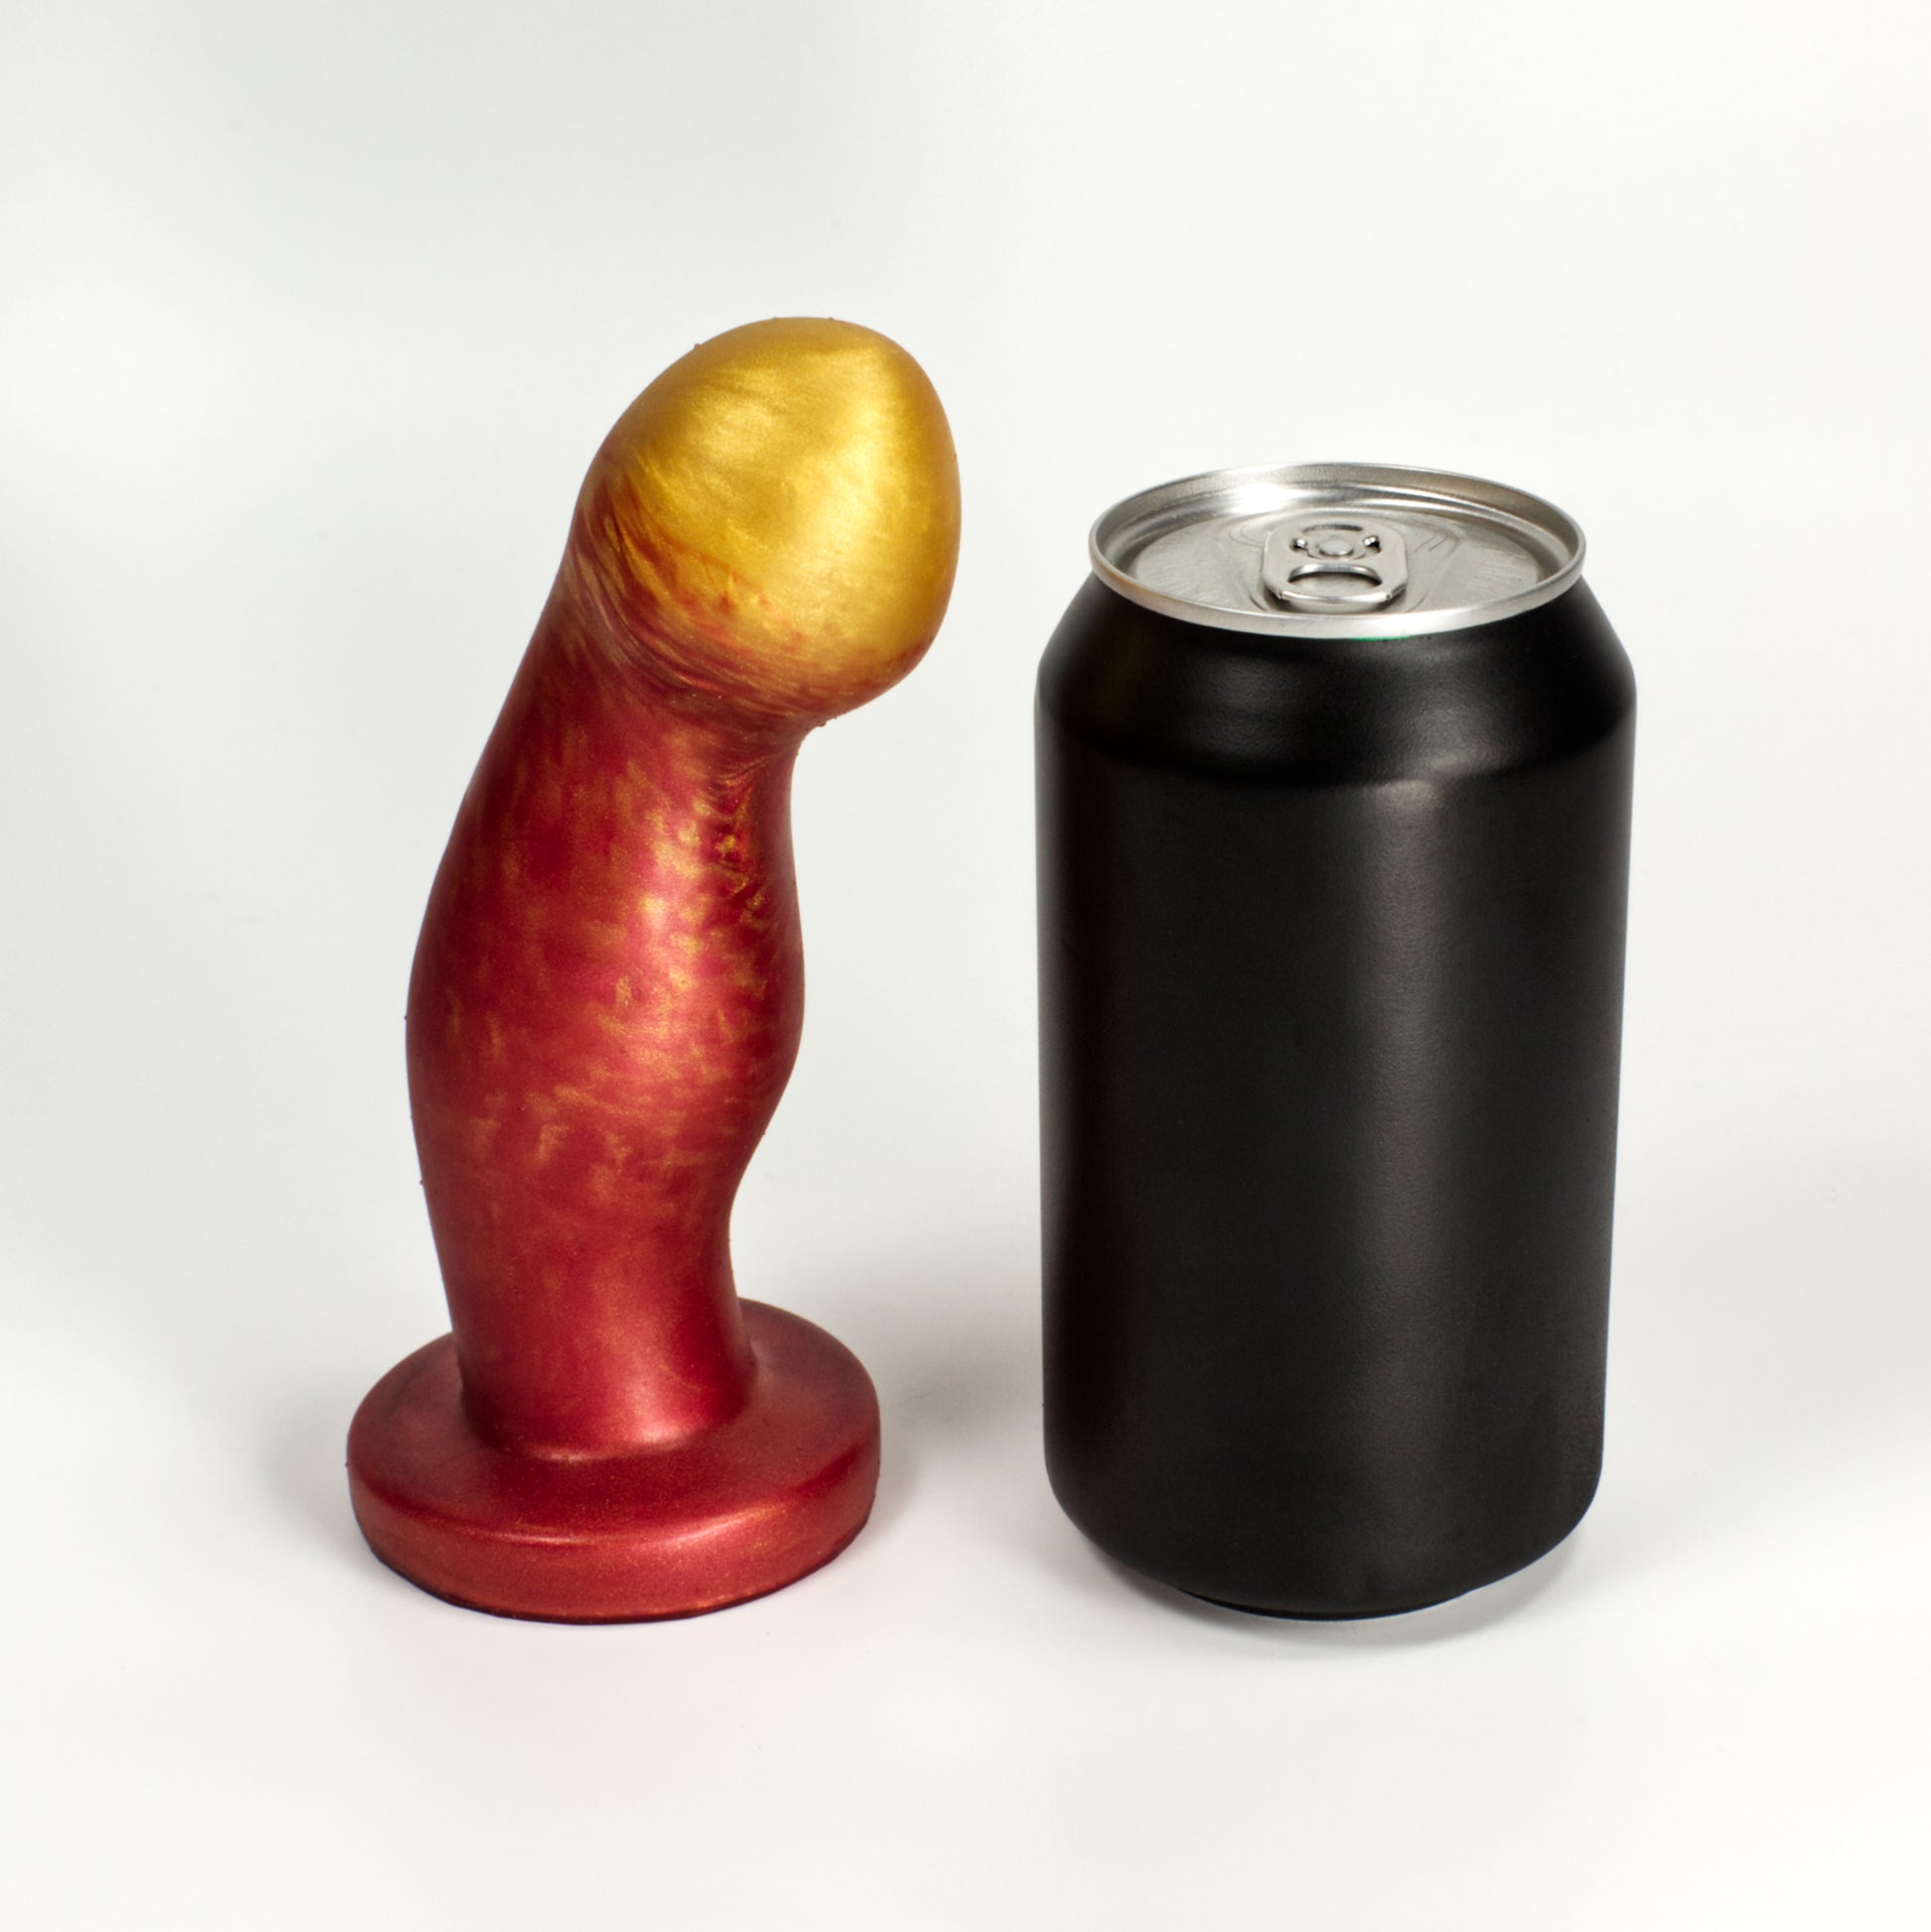 Side view of the Ally Small next to a standard soda can, showing that the toy is a little taller than the can and two thirds as wide at the middle bump.